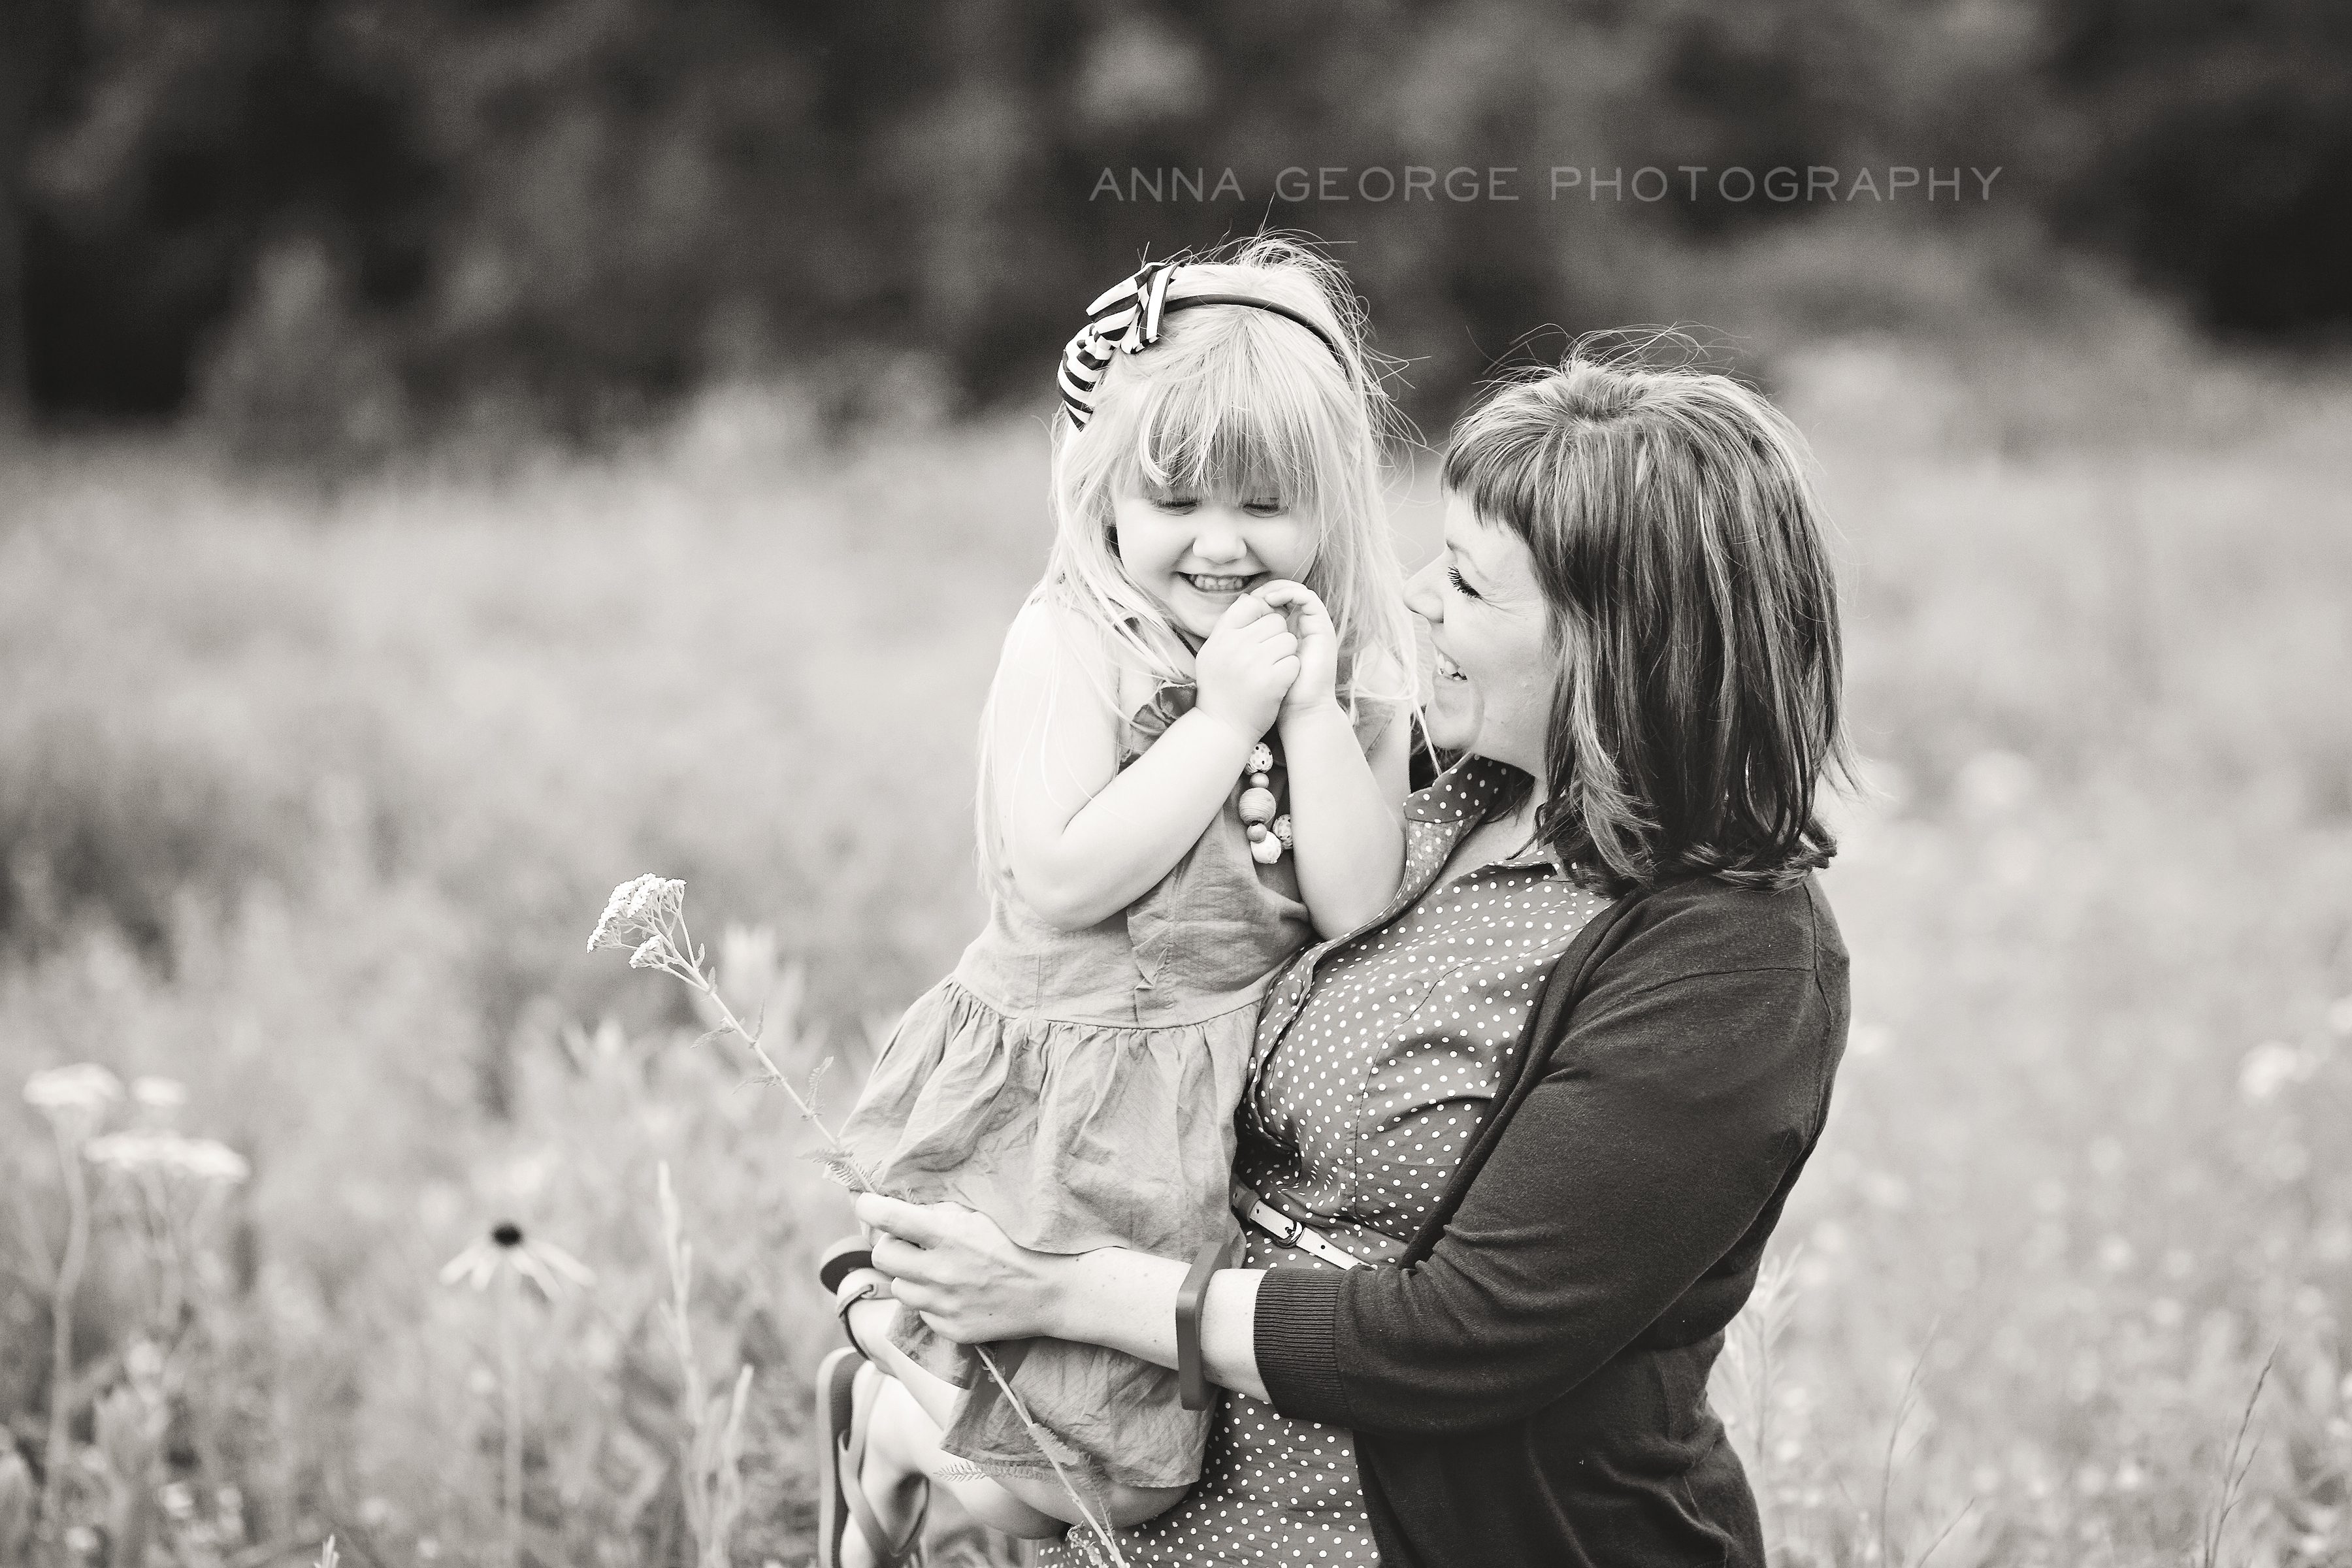 Madison WI child & family photography - anna george photography - www.annageorgephoto.com